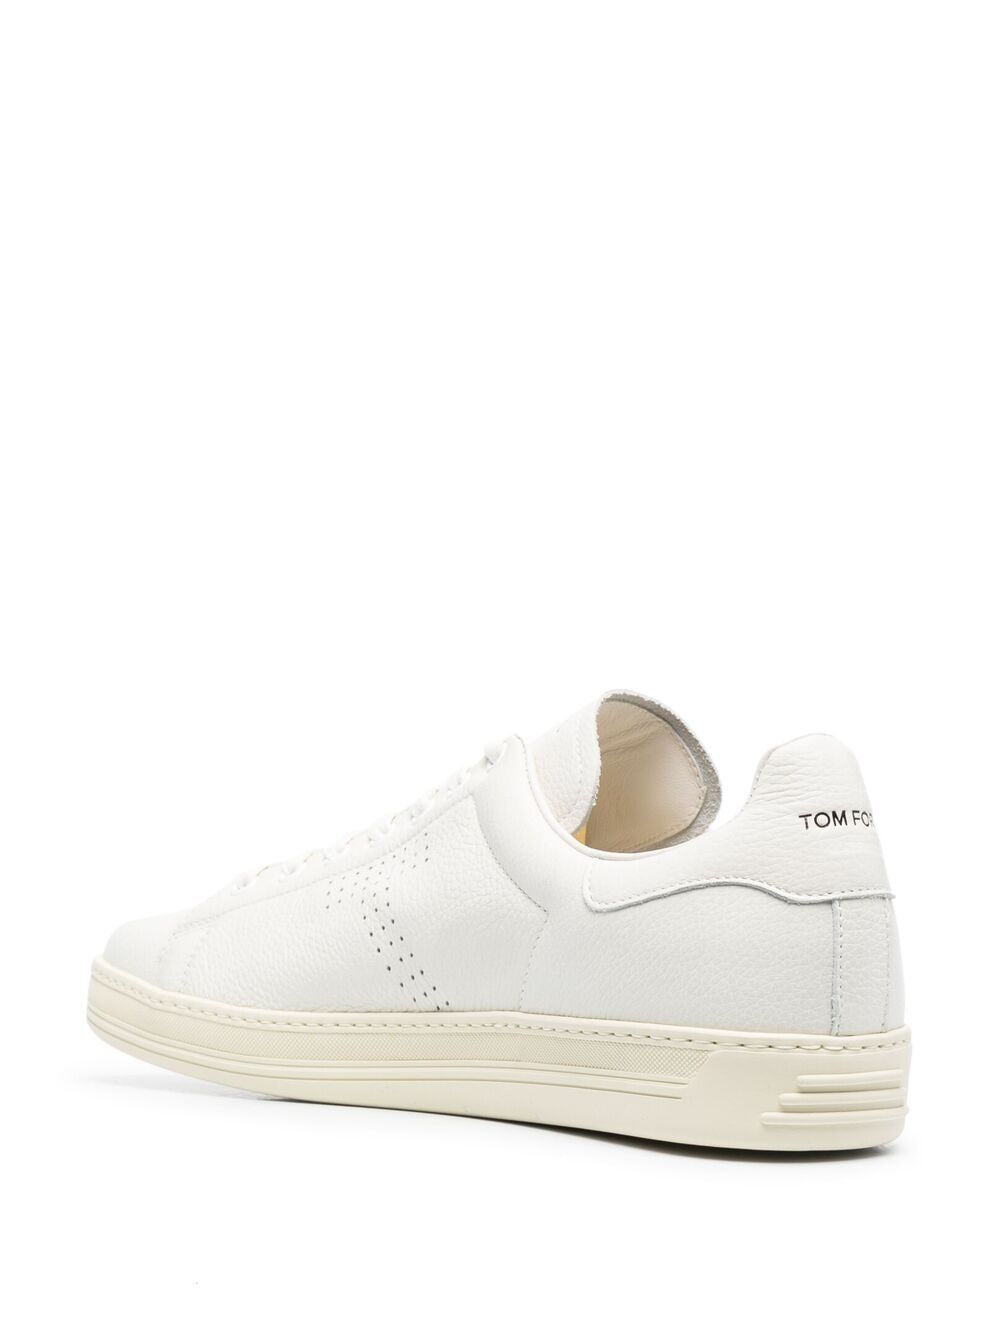 TOM FORD Warwick Grained Leather Sneakers White - MAISONDEFASHION.COM